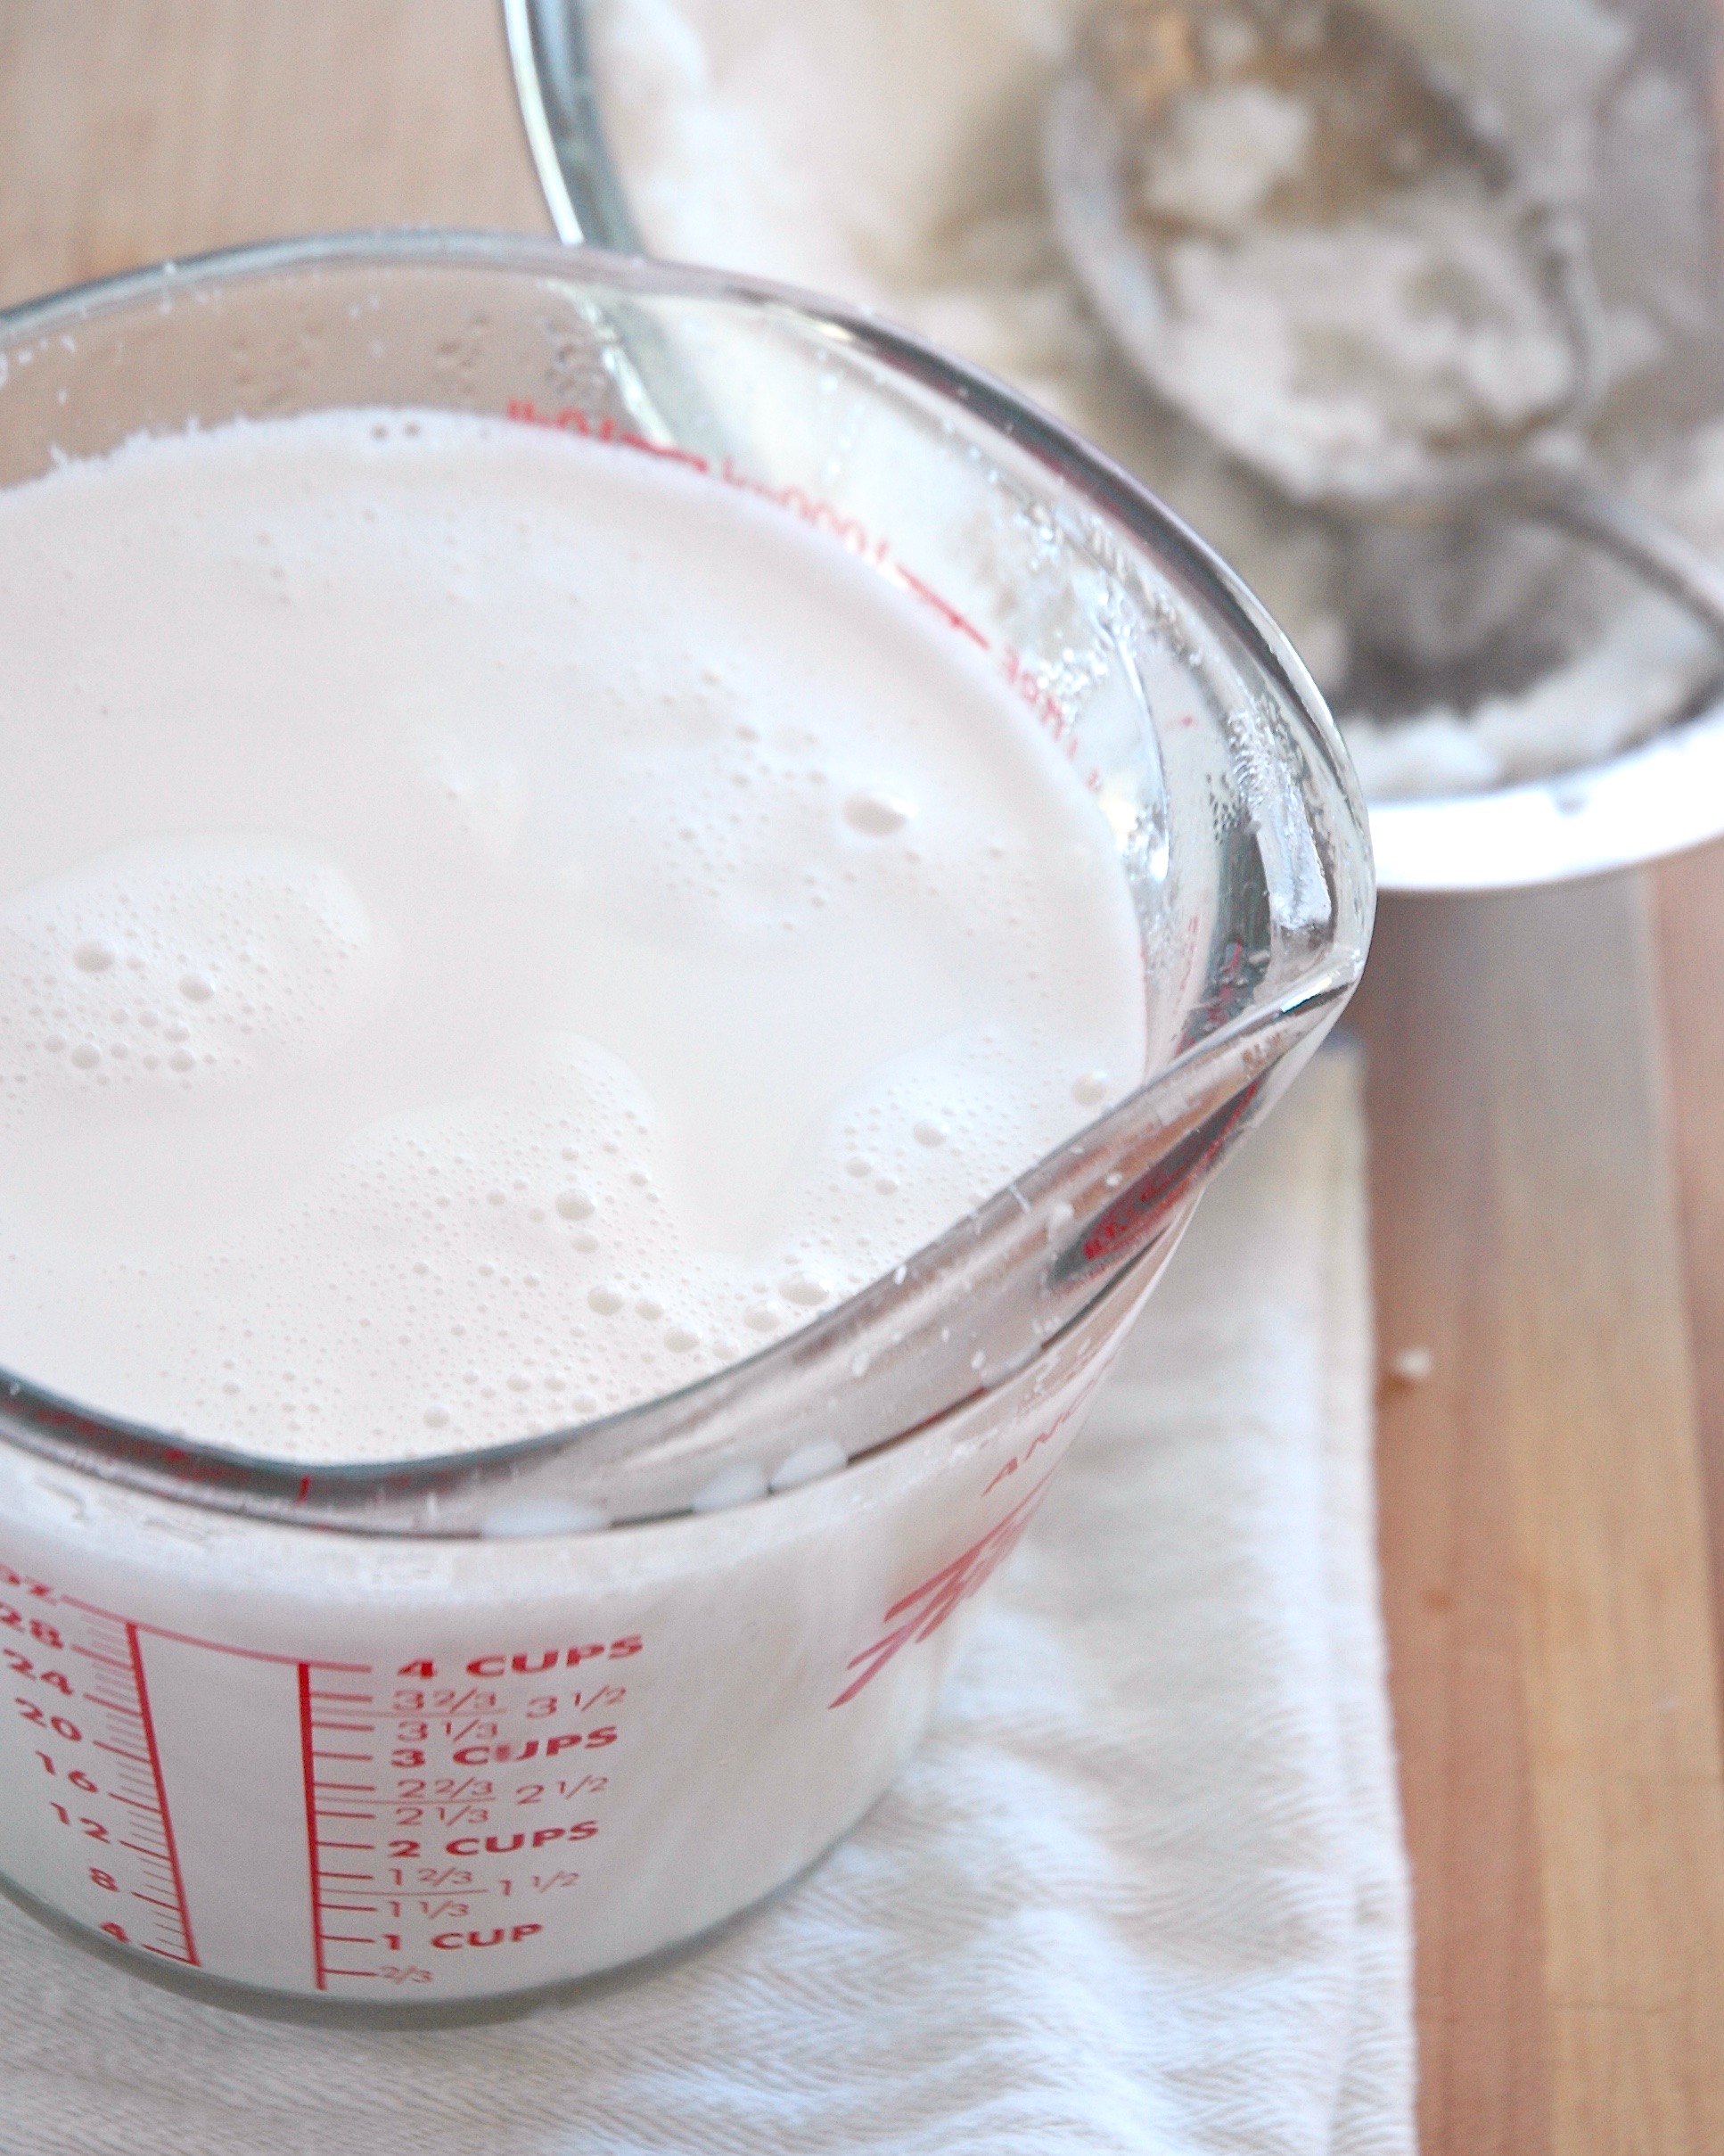 Homemade coconut milk recipe that's rich and creamy, and as close to "straight from the source" as you can get without having to crack open a fresh coconut!